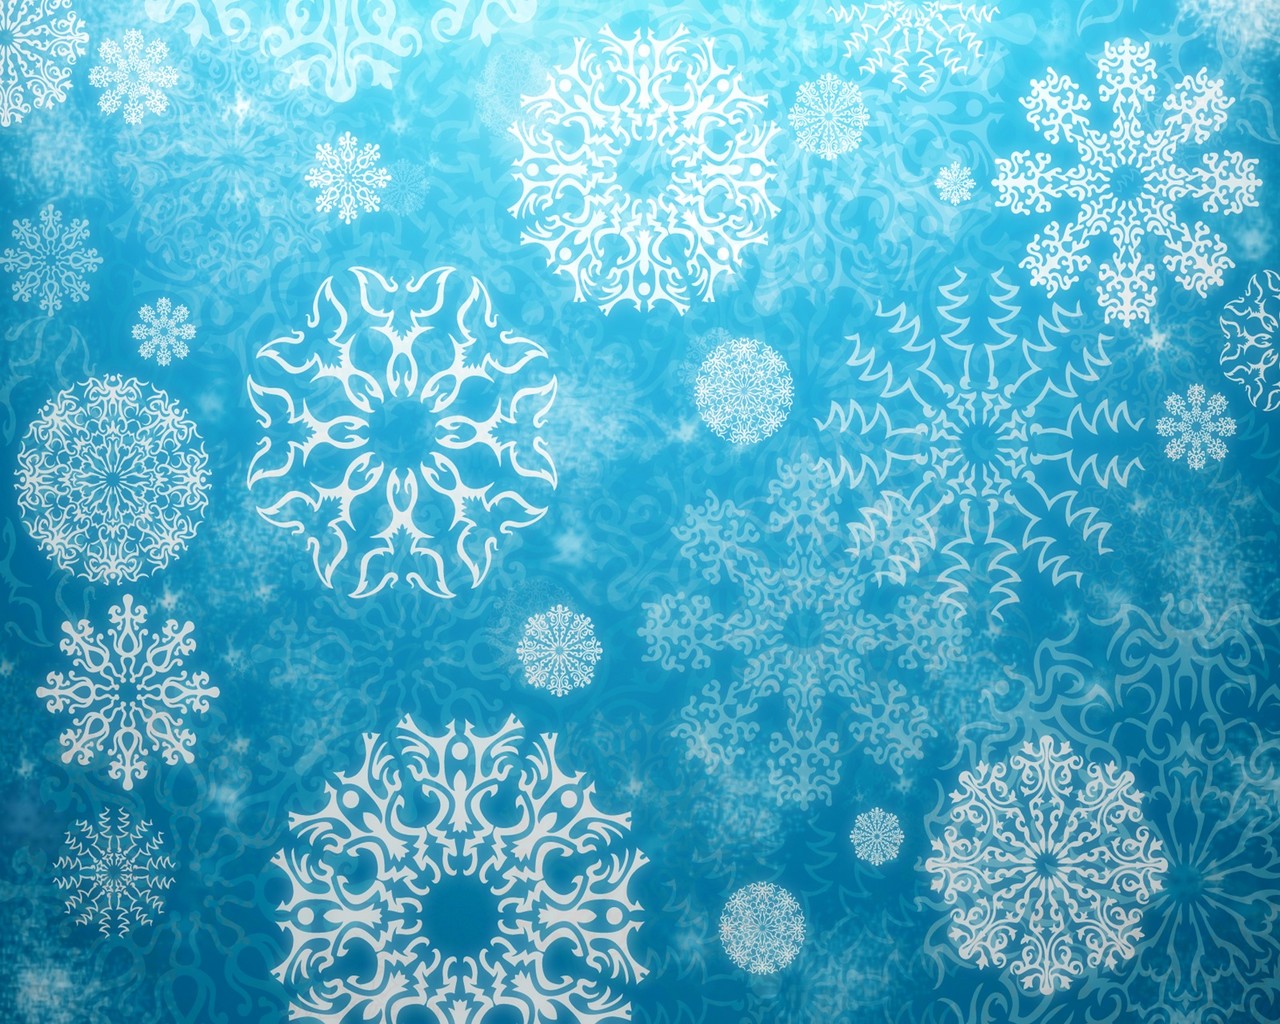 Snowflake Pictures